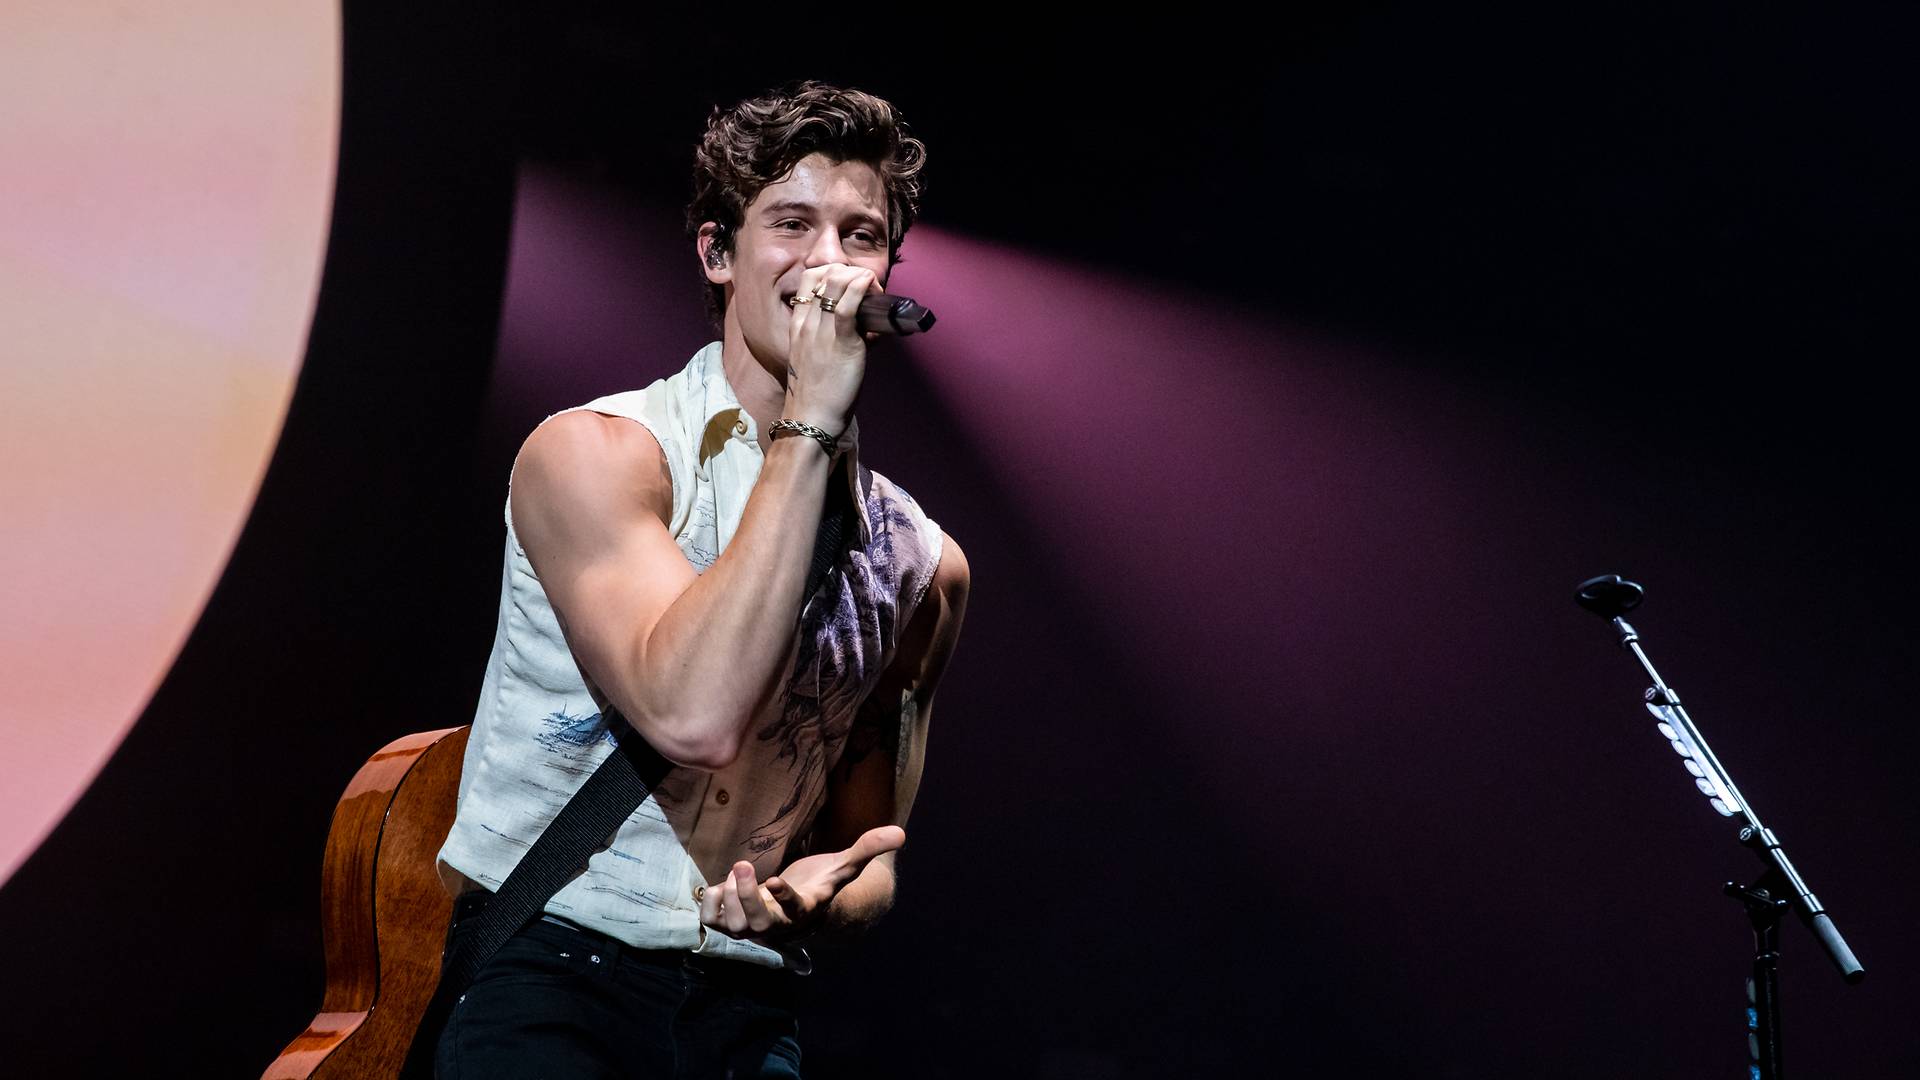 He S Taken But Shawn Mendes Shows That The Perfect Candidate